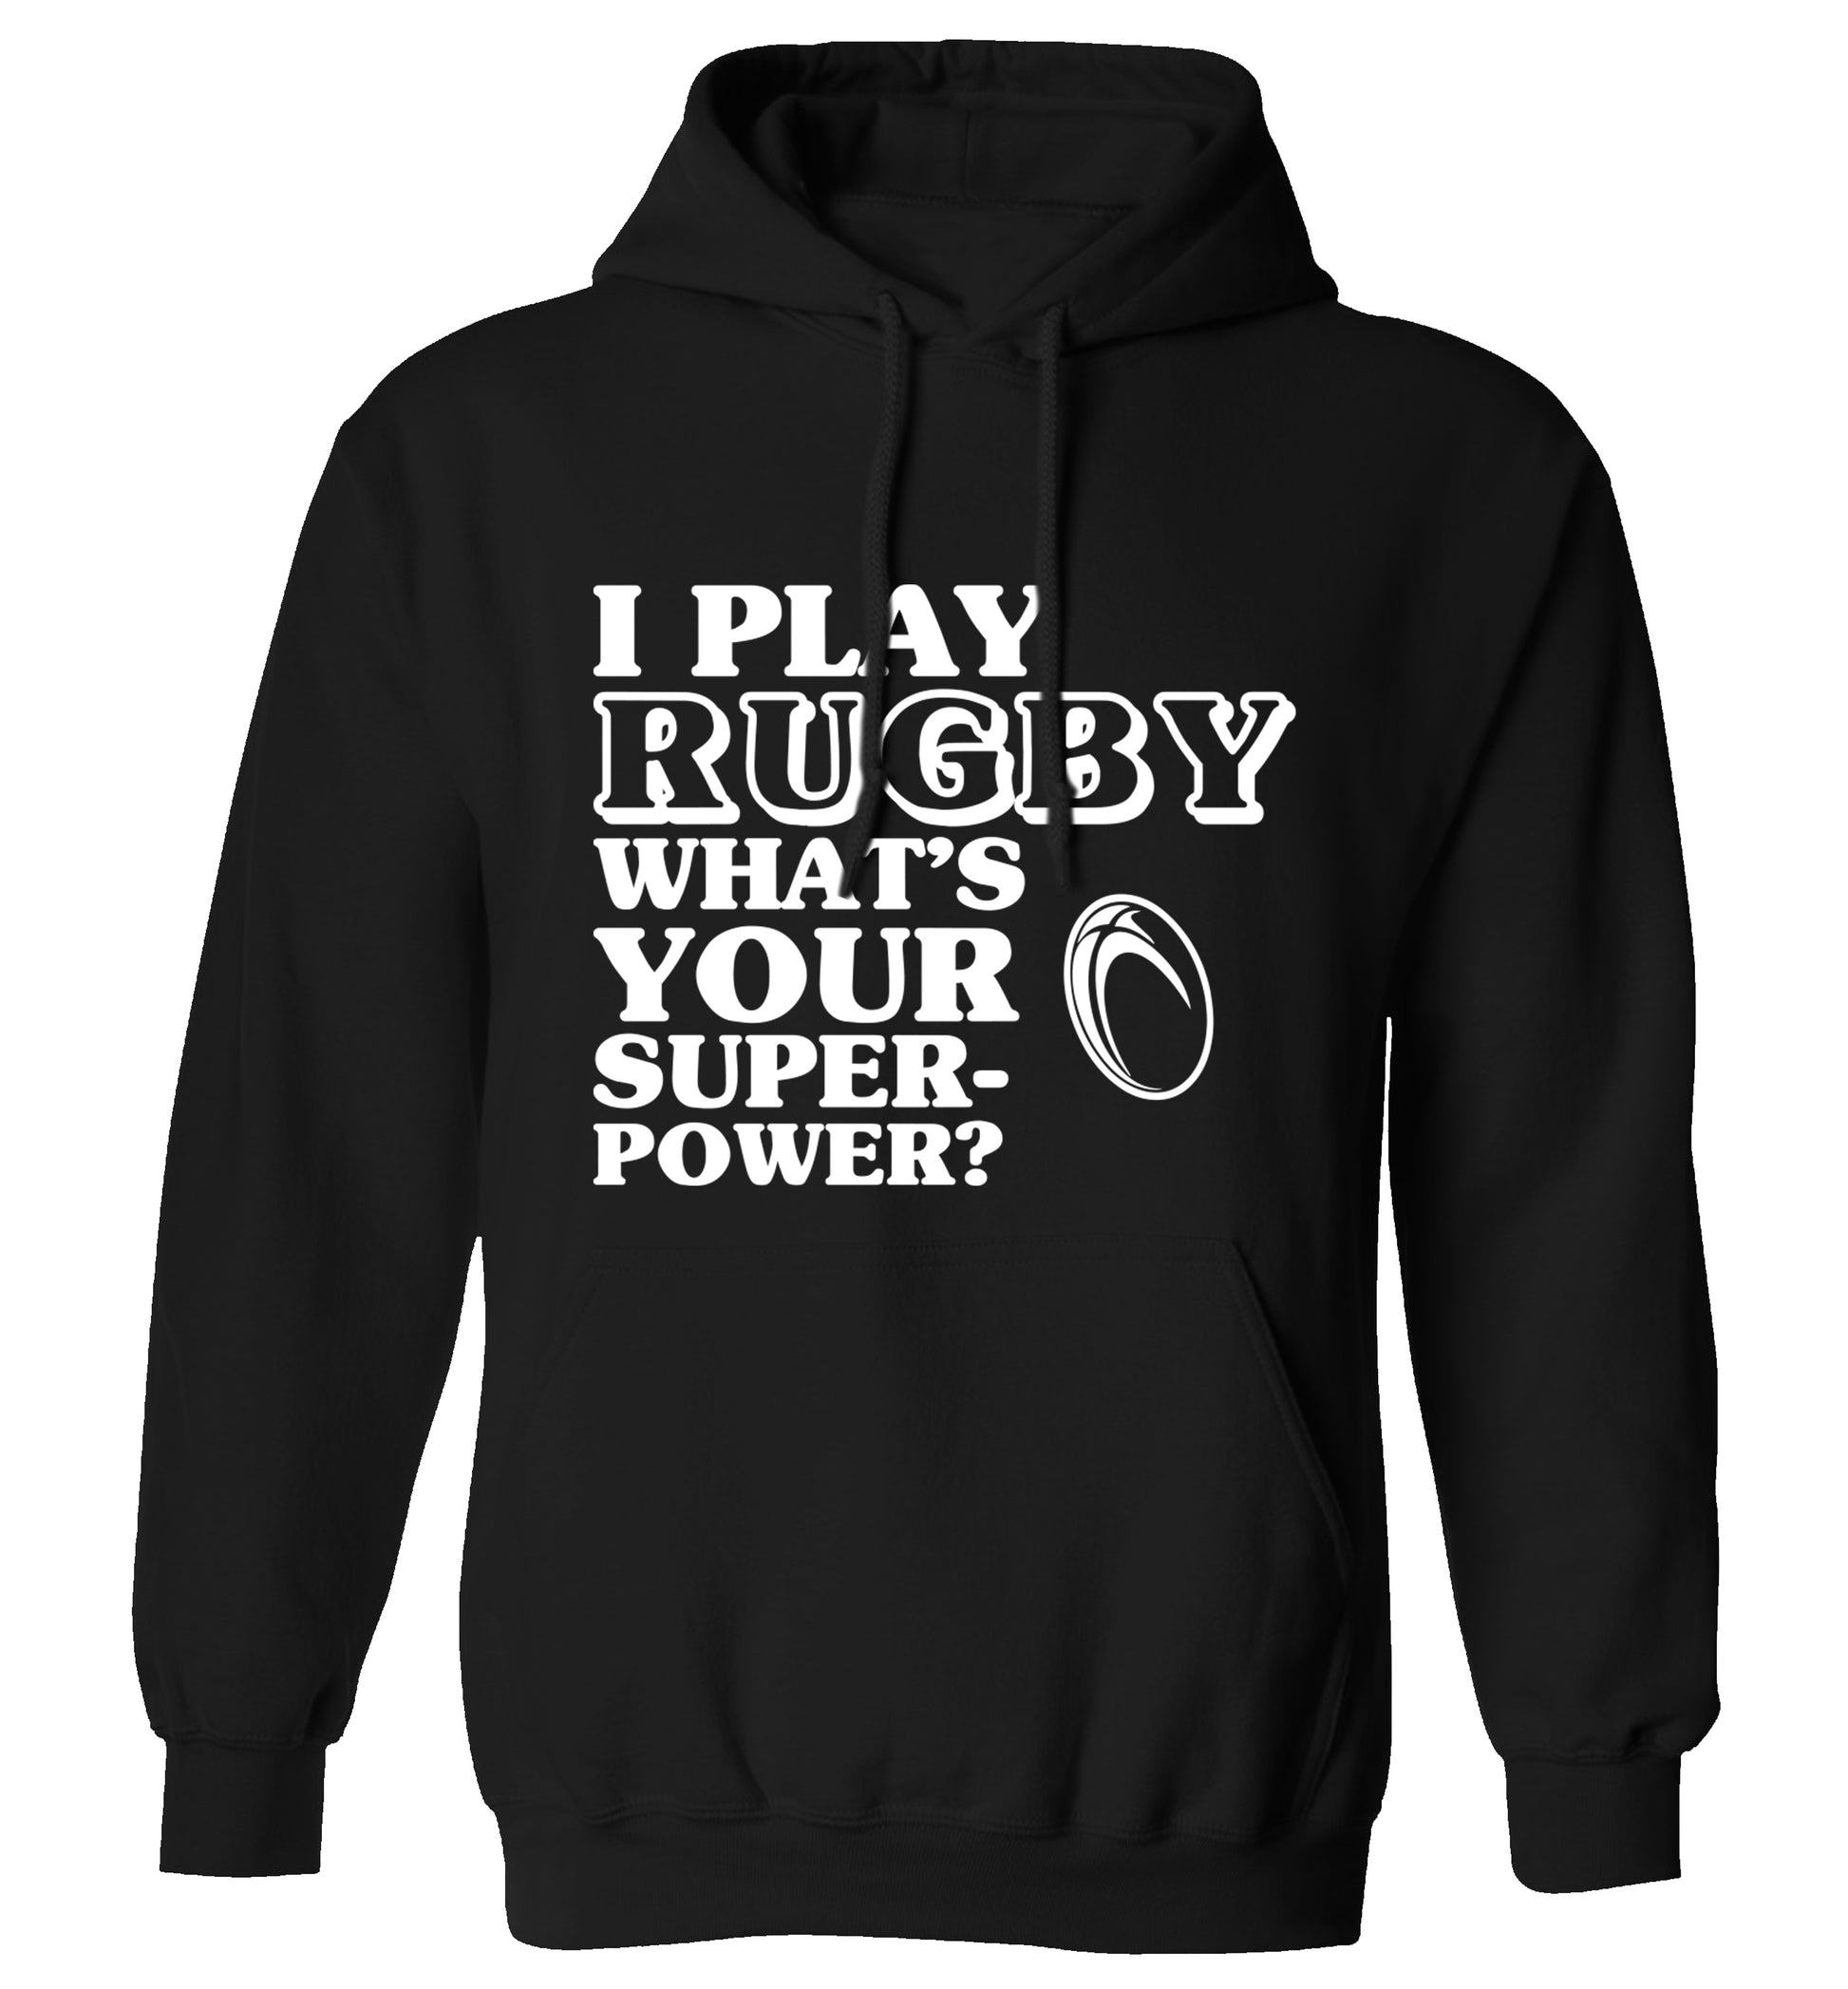 I play rugby what's your superpower? adults unisex black hoodie 2XL